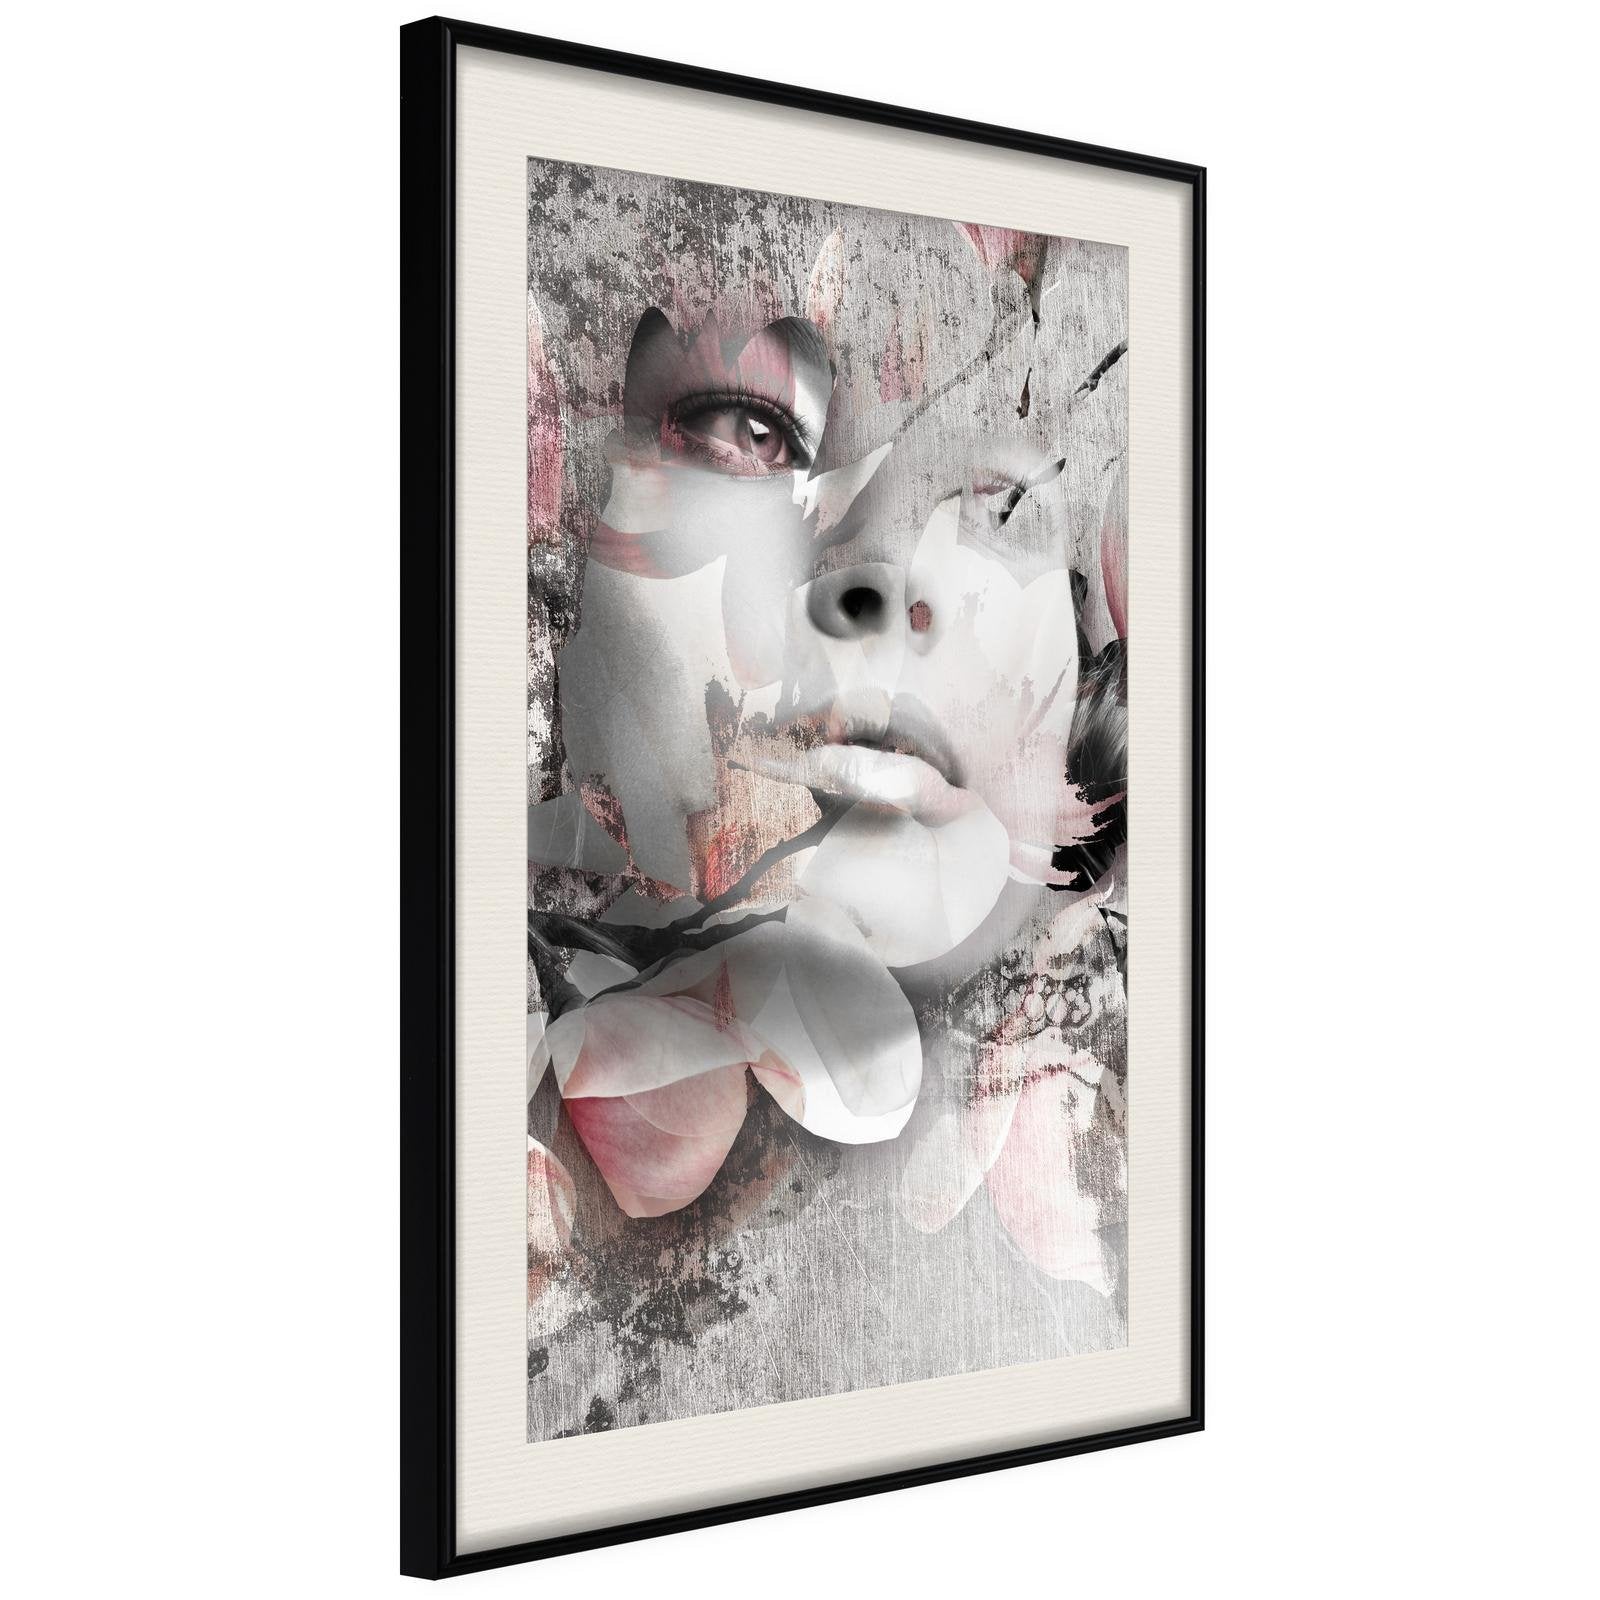 Inramad Poster / Tavla - Lady in the Flowers-Poster Inramad-Artgeist-20x30-Svart ram med passepartout-peaceofhome.se